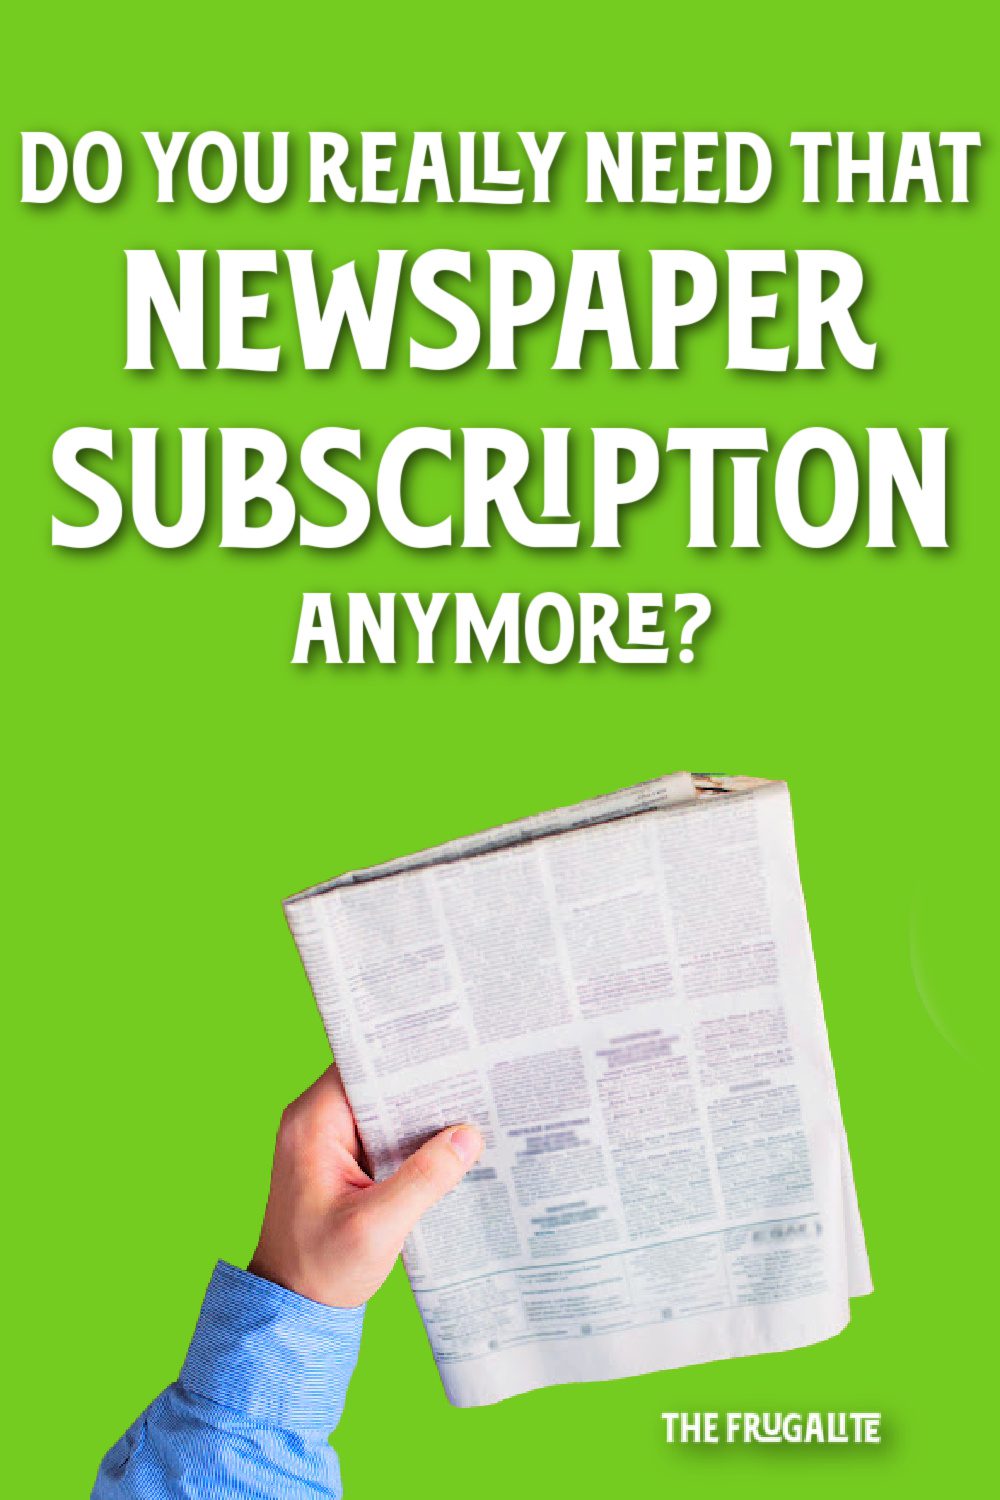 Do You Really Need That Newspaper Subscription Anymore?